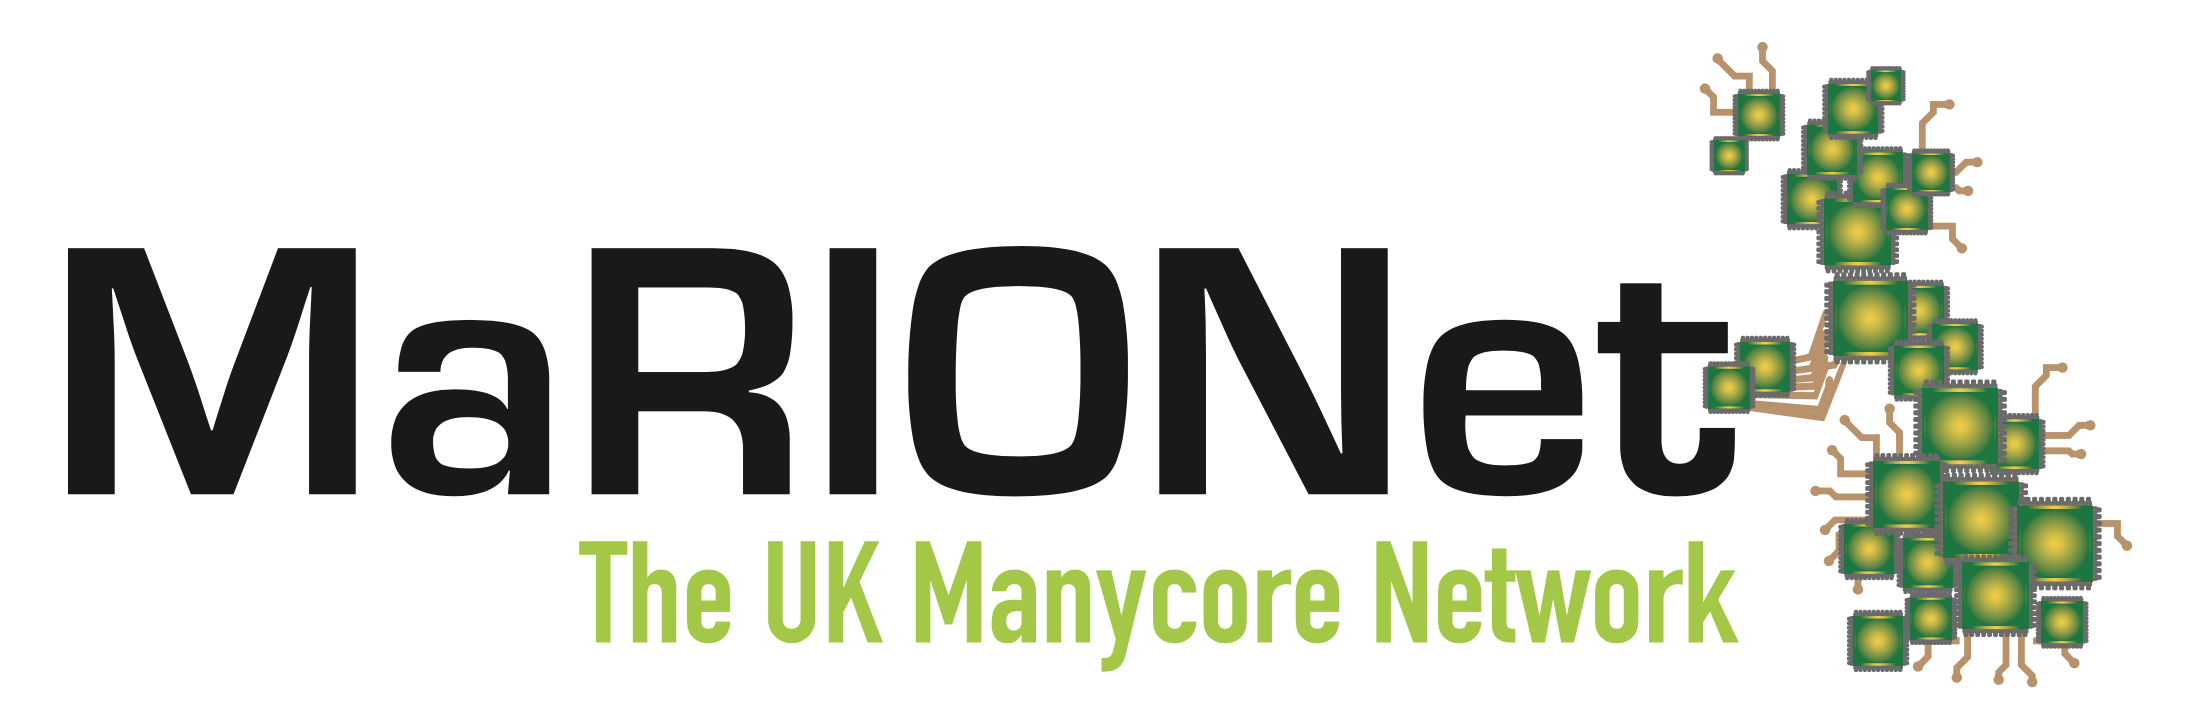 Marionet: The UK Manycore Network.